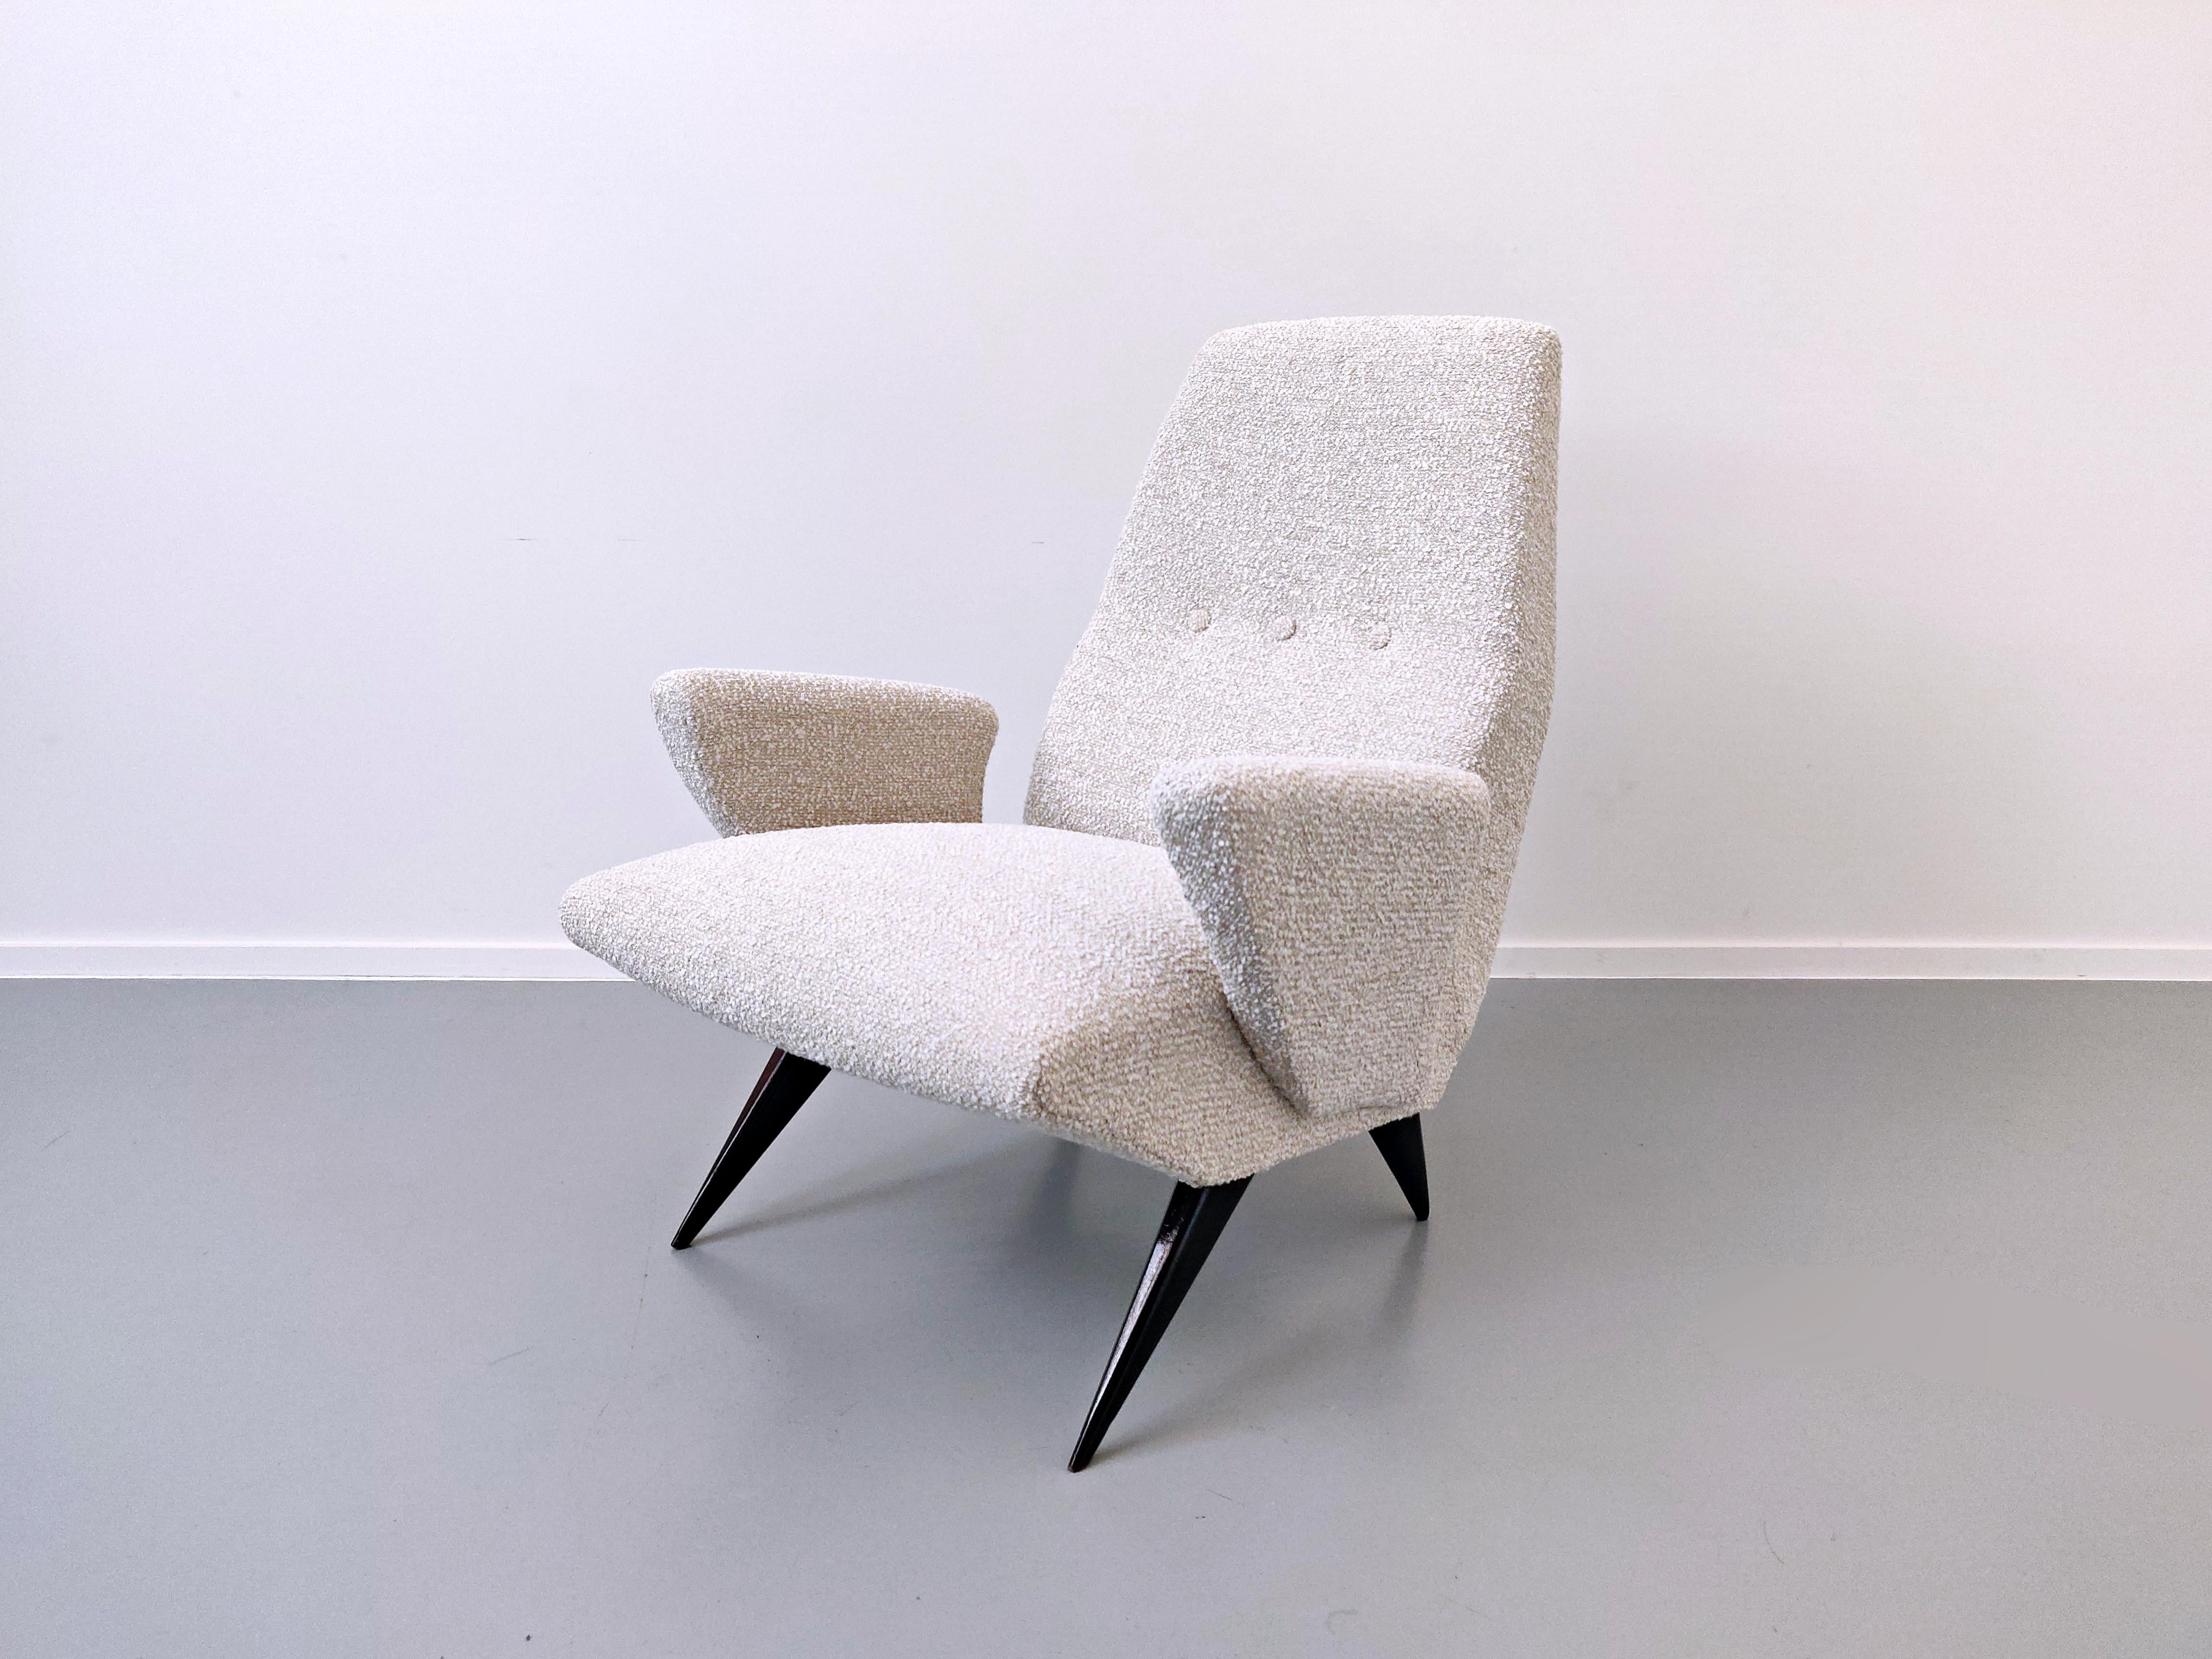 Pair of Mid-Century Modern  Armchairs by Nino Zoncada for Frimar, Italy  For Sale 7